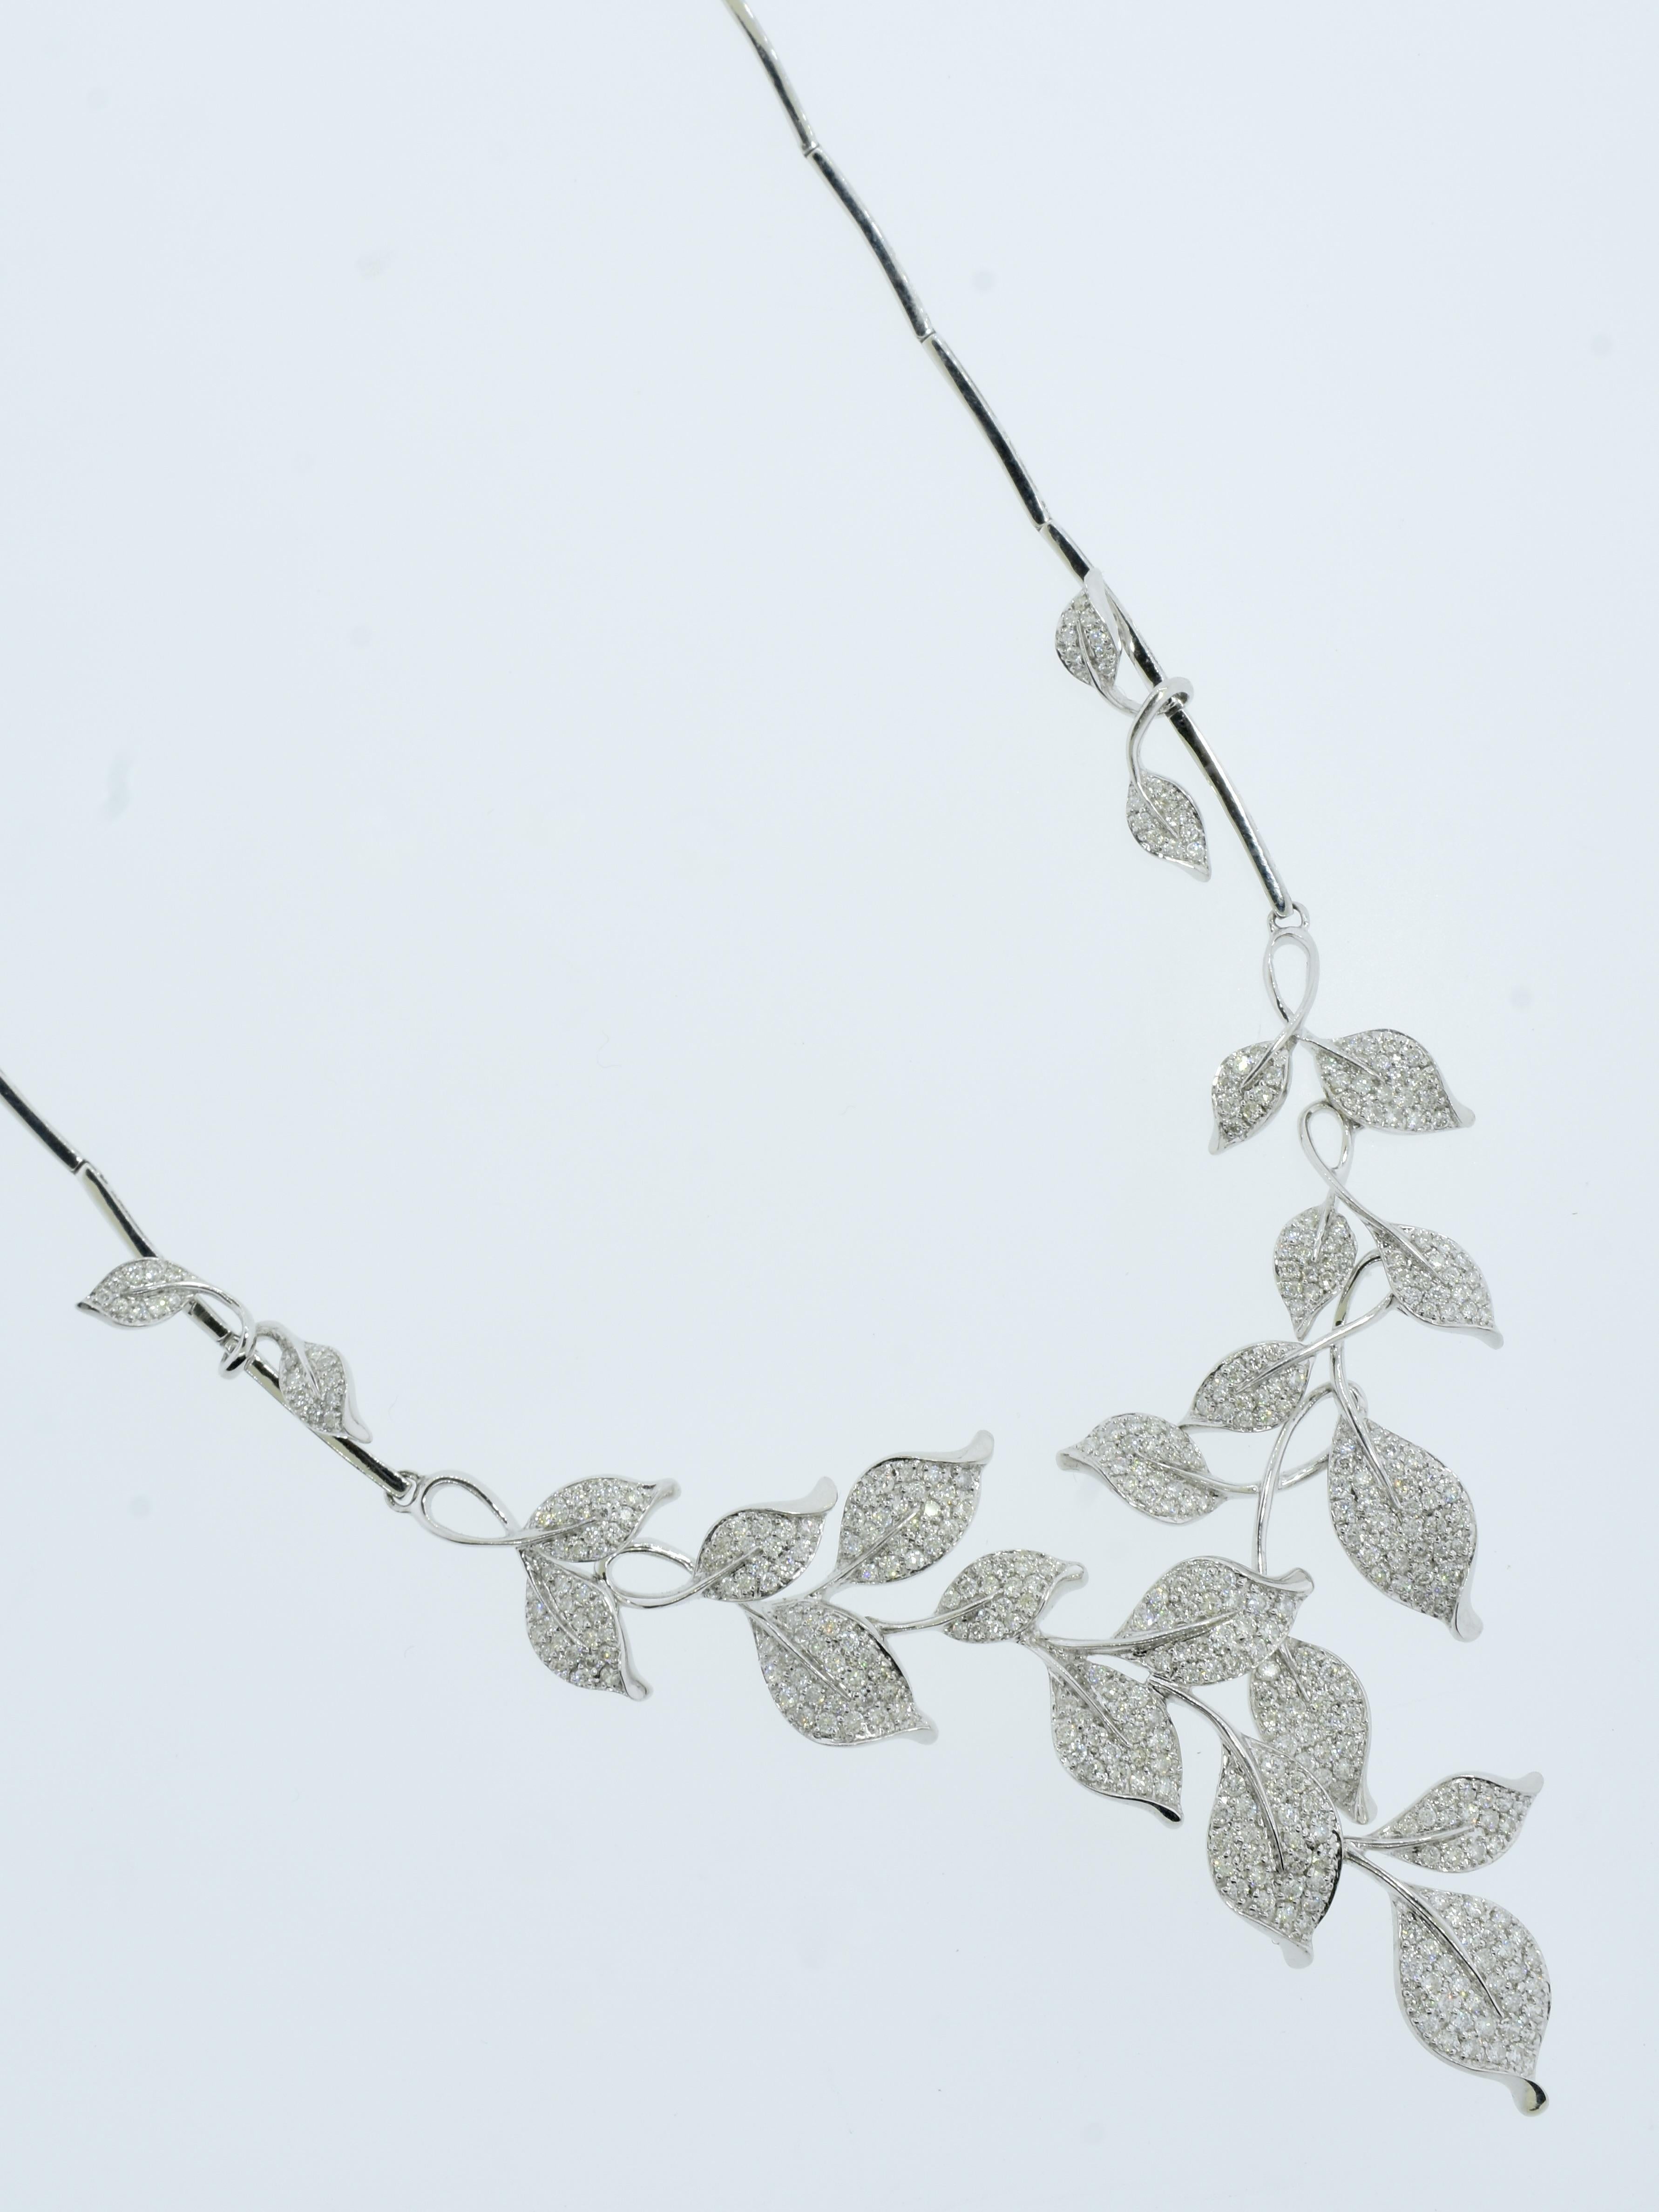 Diamond and 18K White Gold Contemporary Necklace of Stylized Foliage. For Sale 1